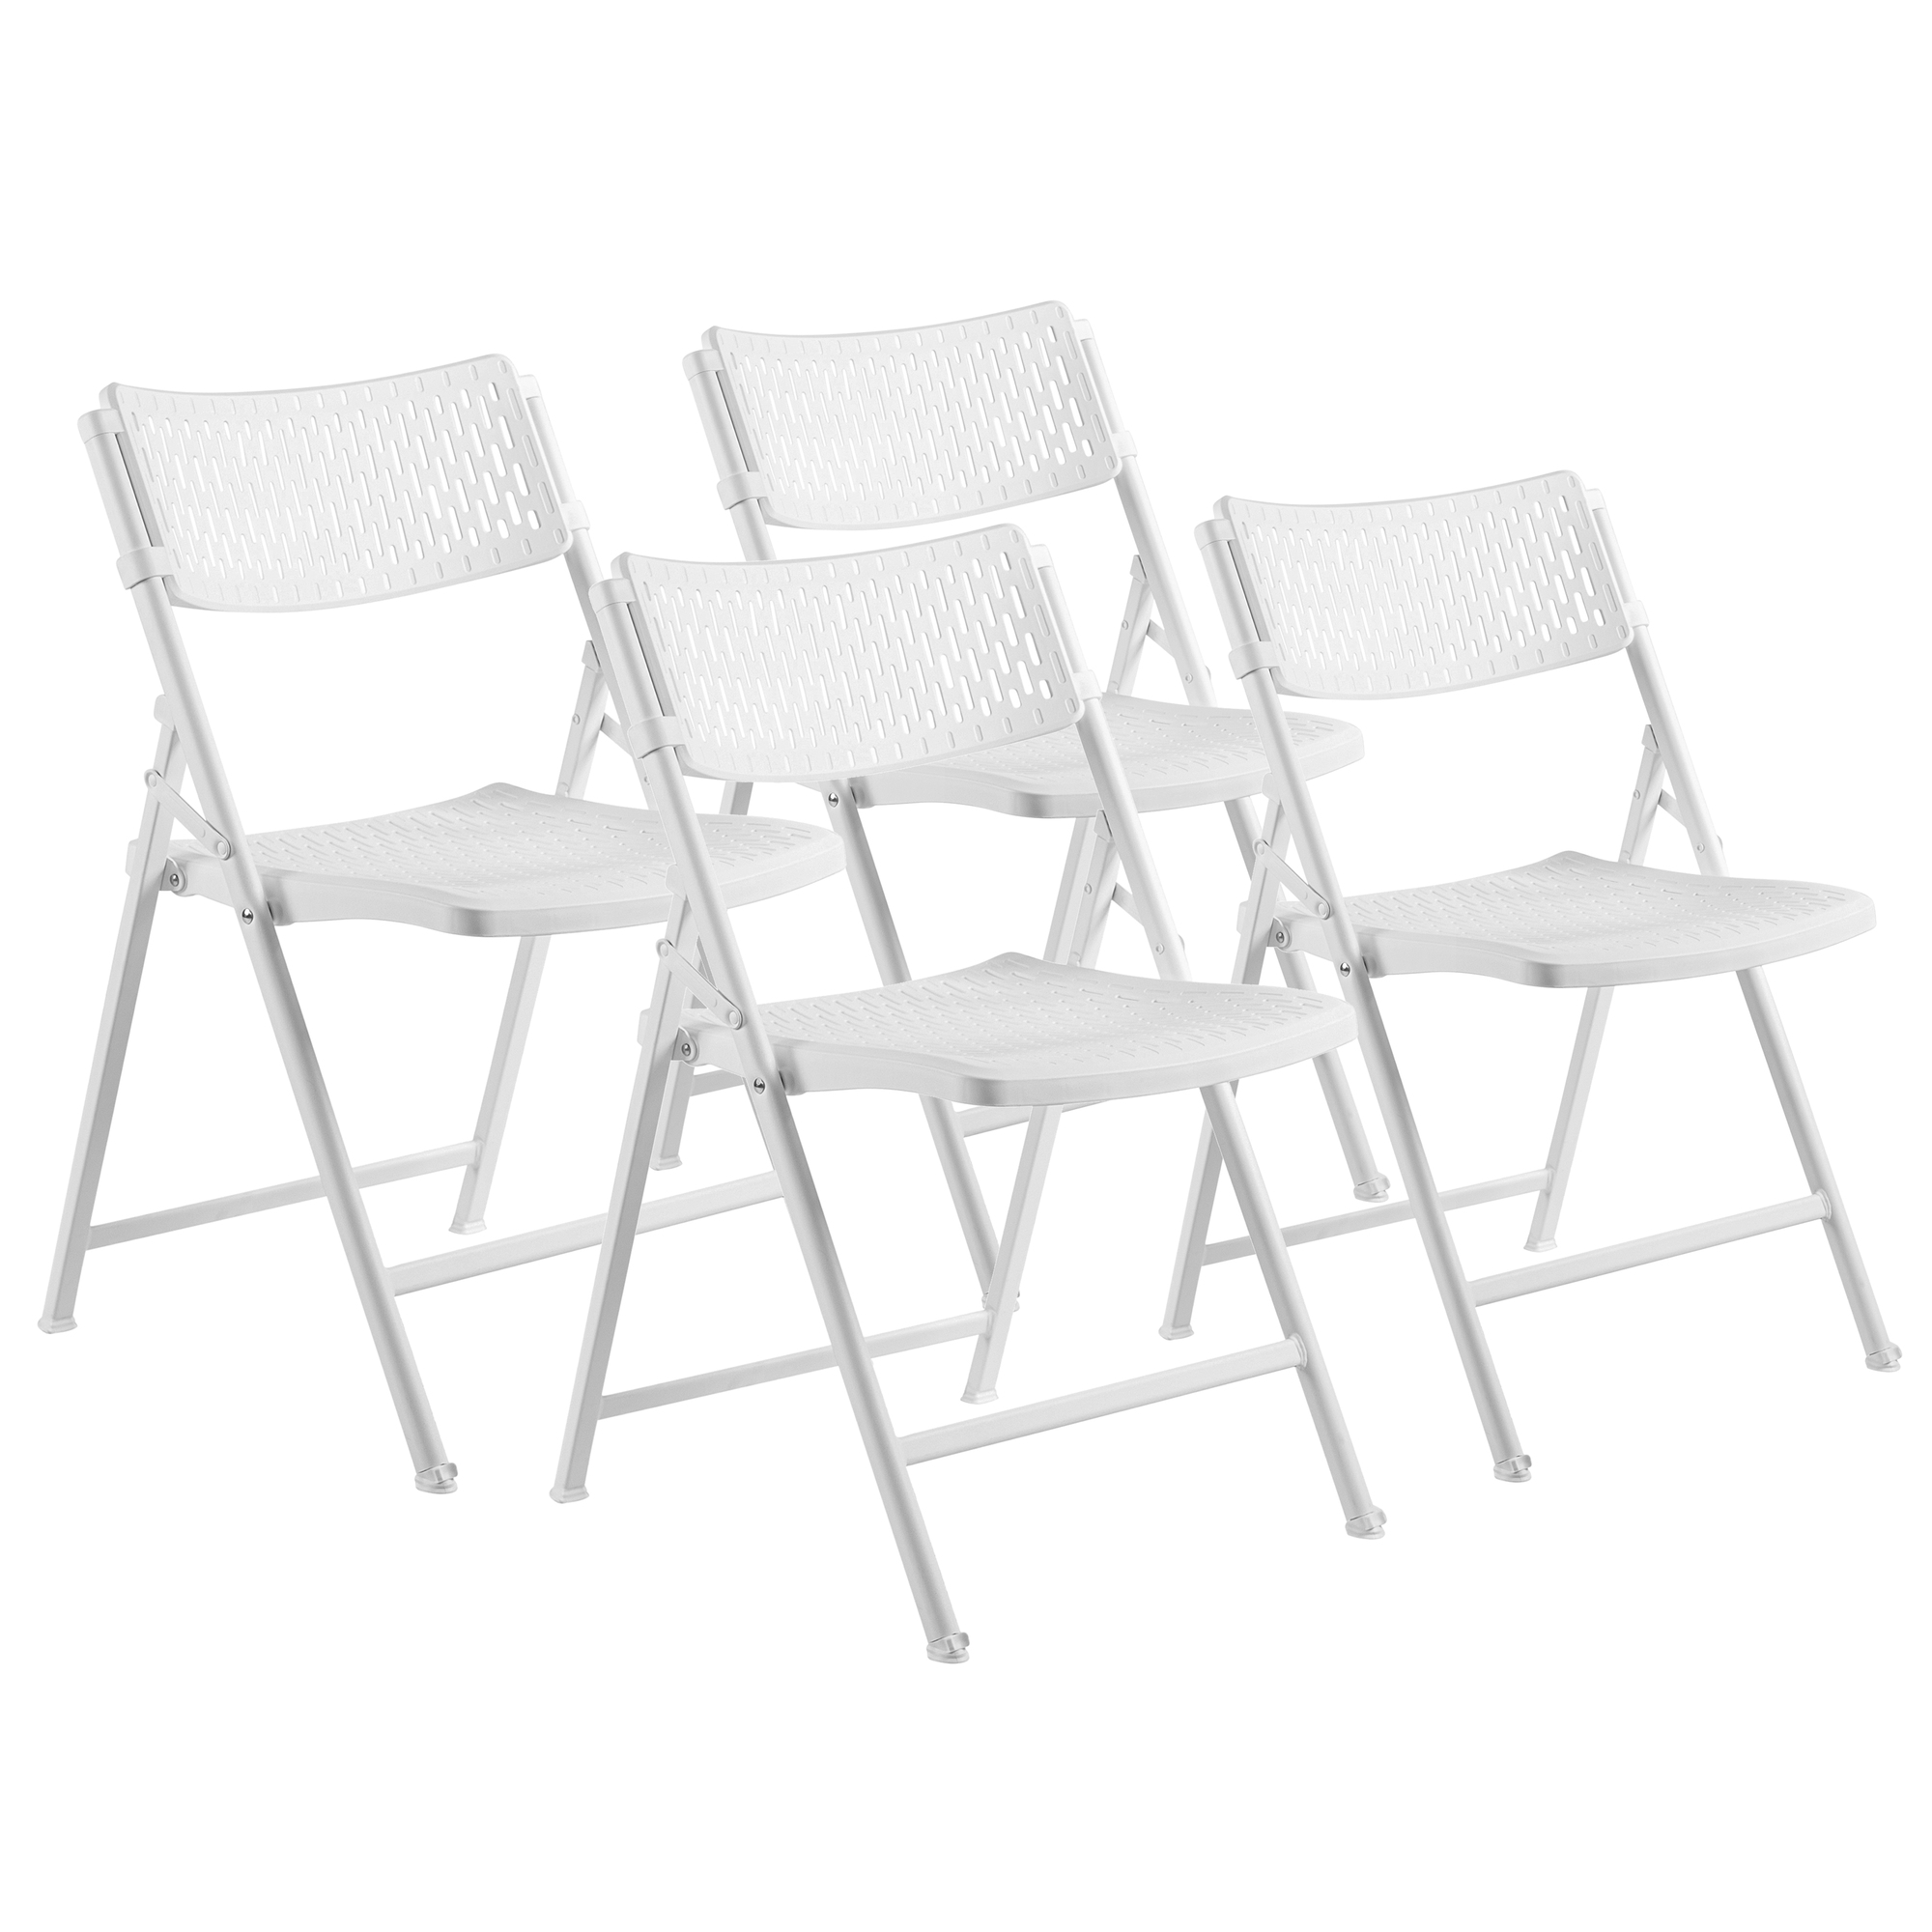 National Public Seating, AirFlex Series Polypropylene Folding Chair, Primary Color White, Included (qty.) 4, Seating Type Folding Chair, Model 1421